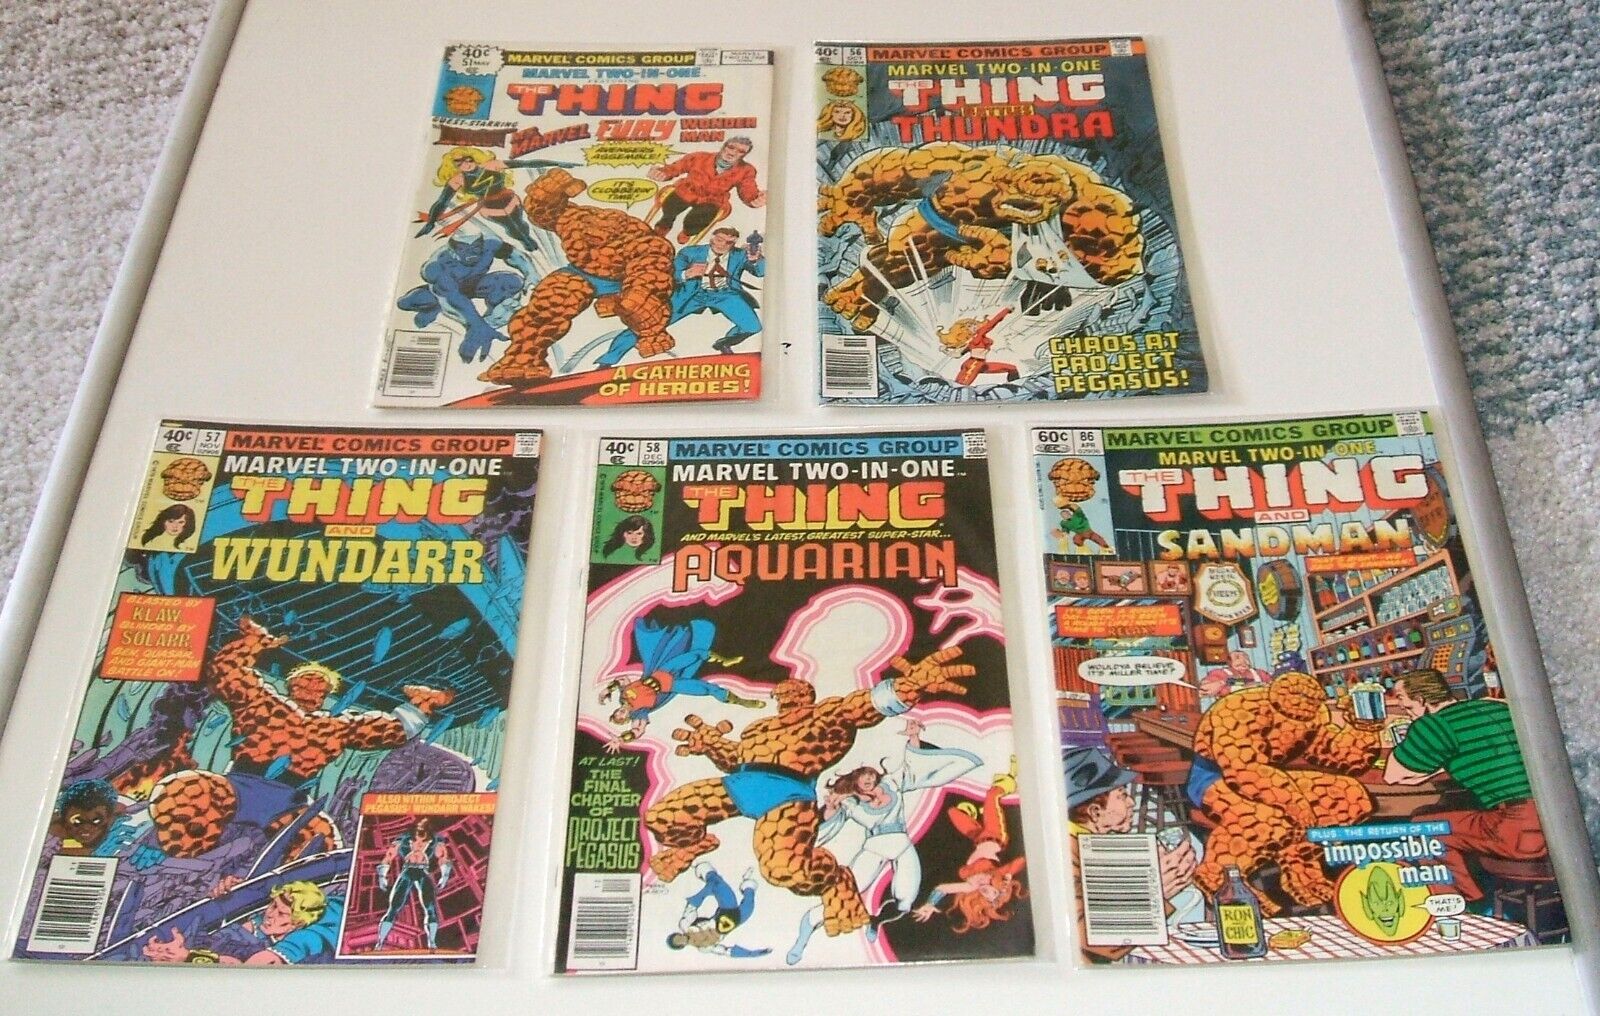 Marvel Comics Group Two-in-One The Thing Lot of 5 #51  #56 #57 #58 #86